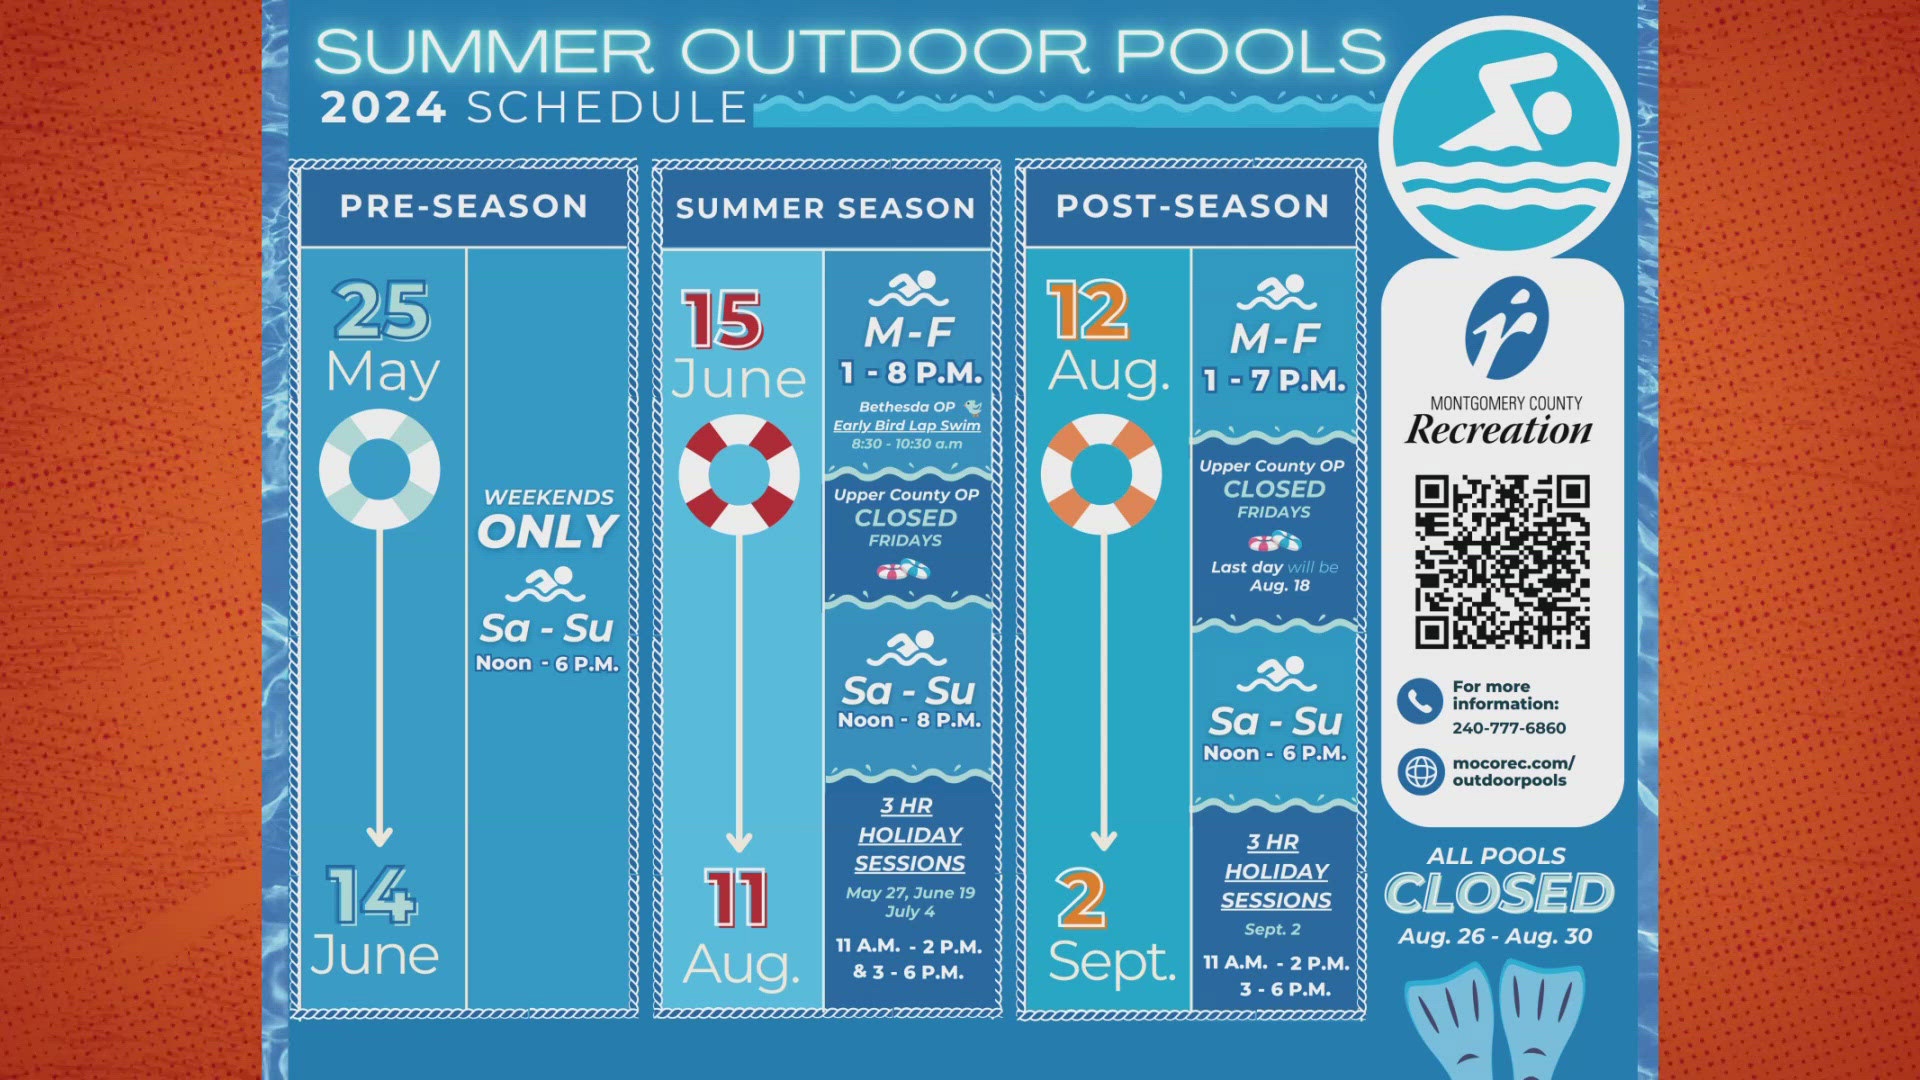 Here's what you need to know before you head to the pool.